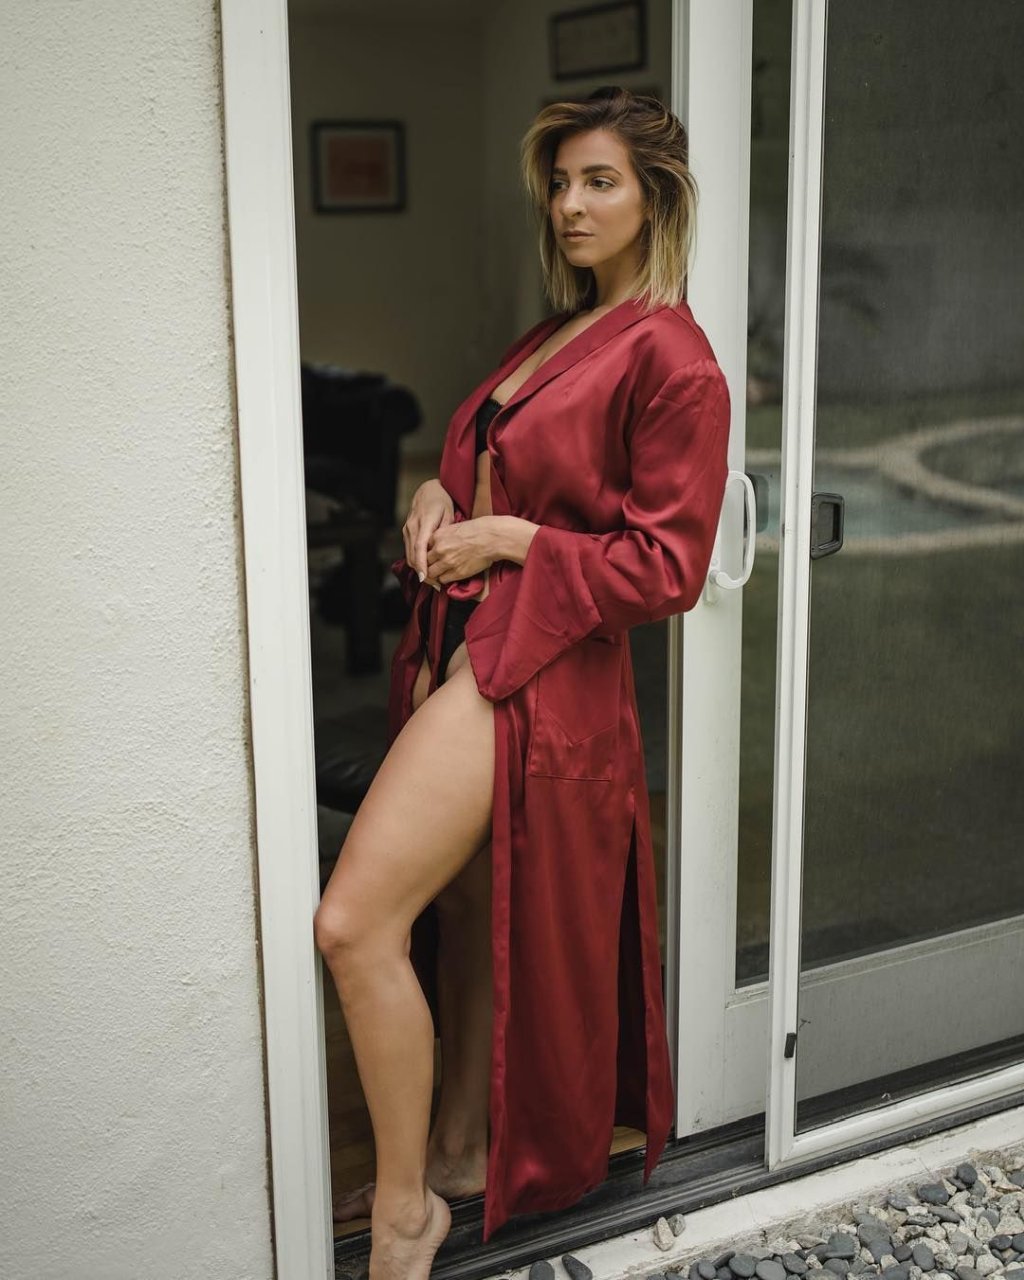 Check out the new Gabbie Hanna’s hot and nude (covered) photos to date. 